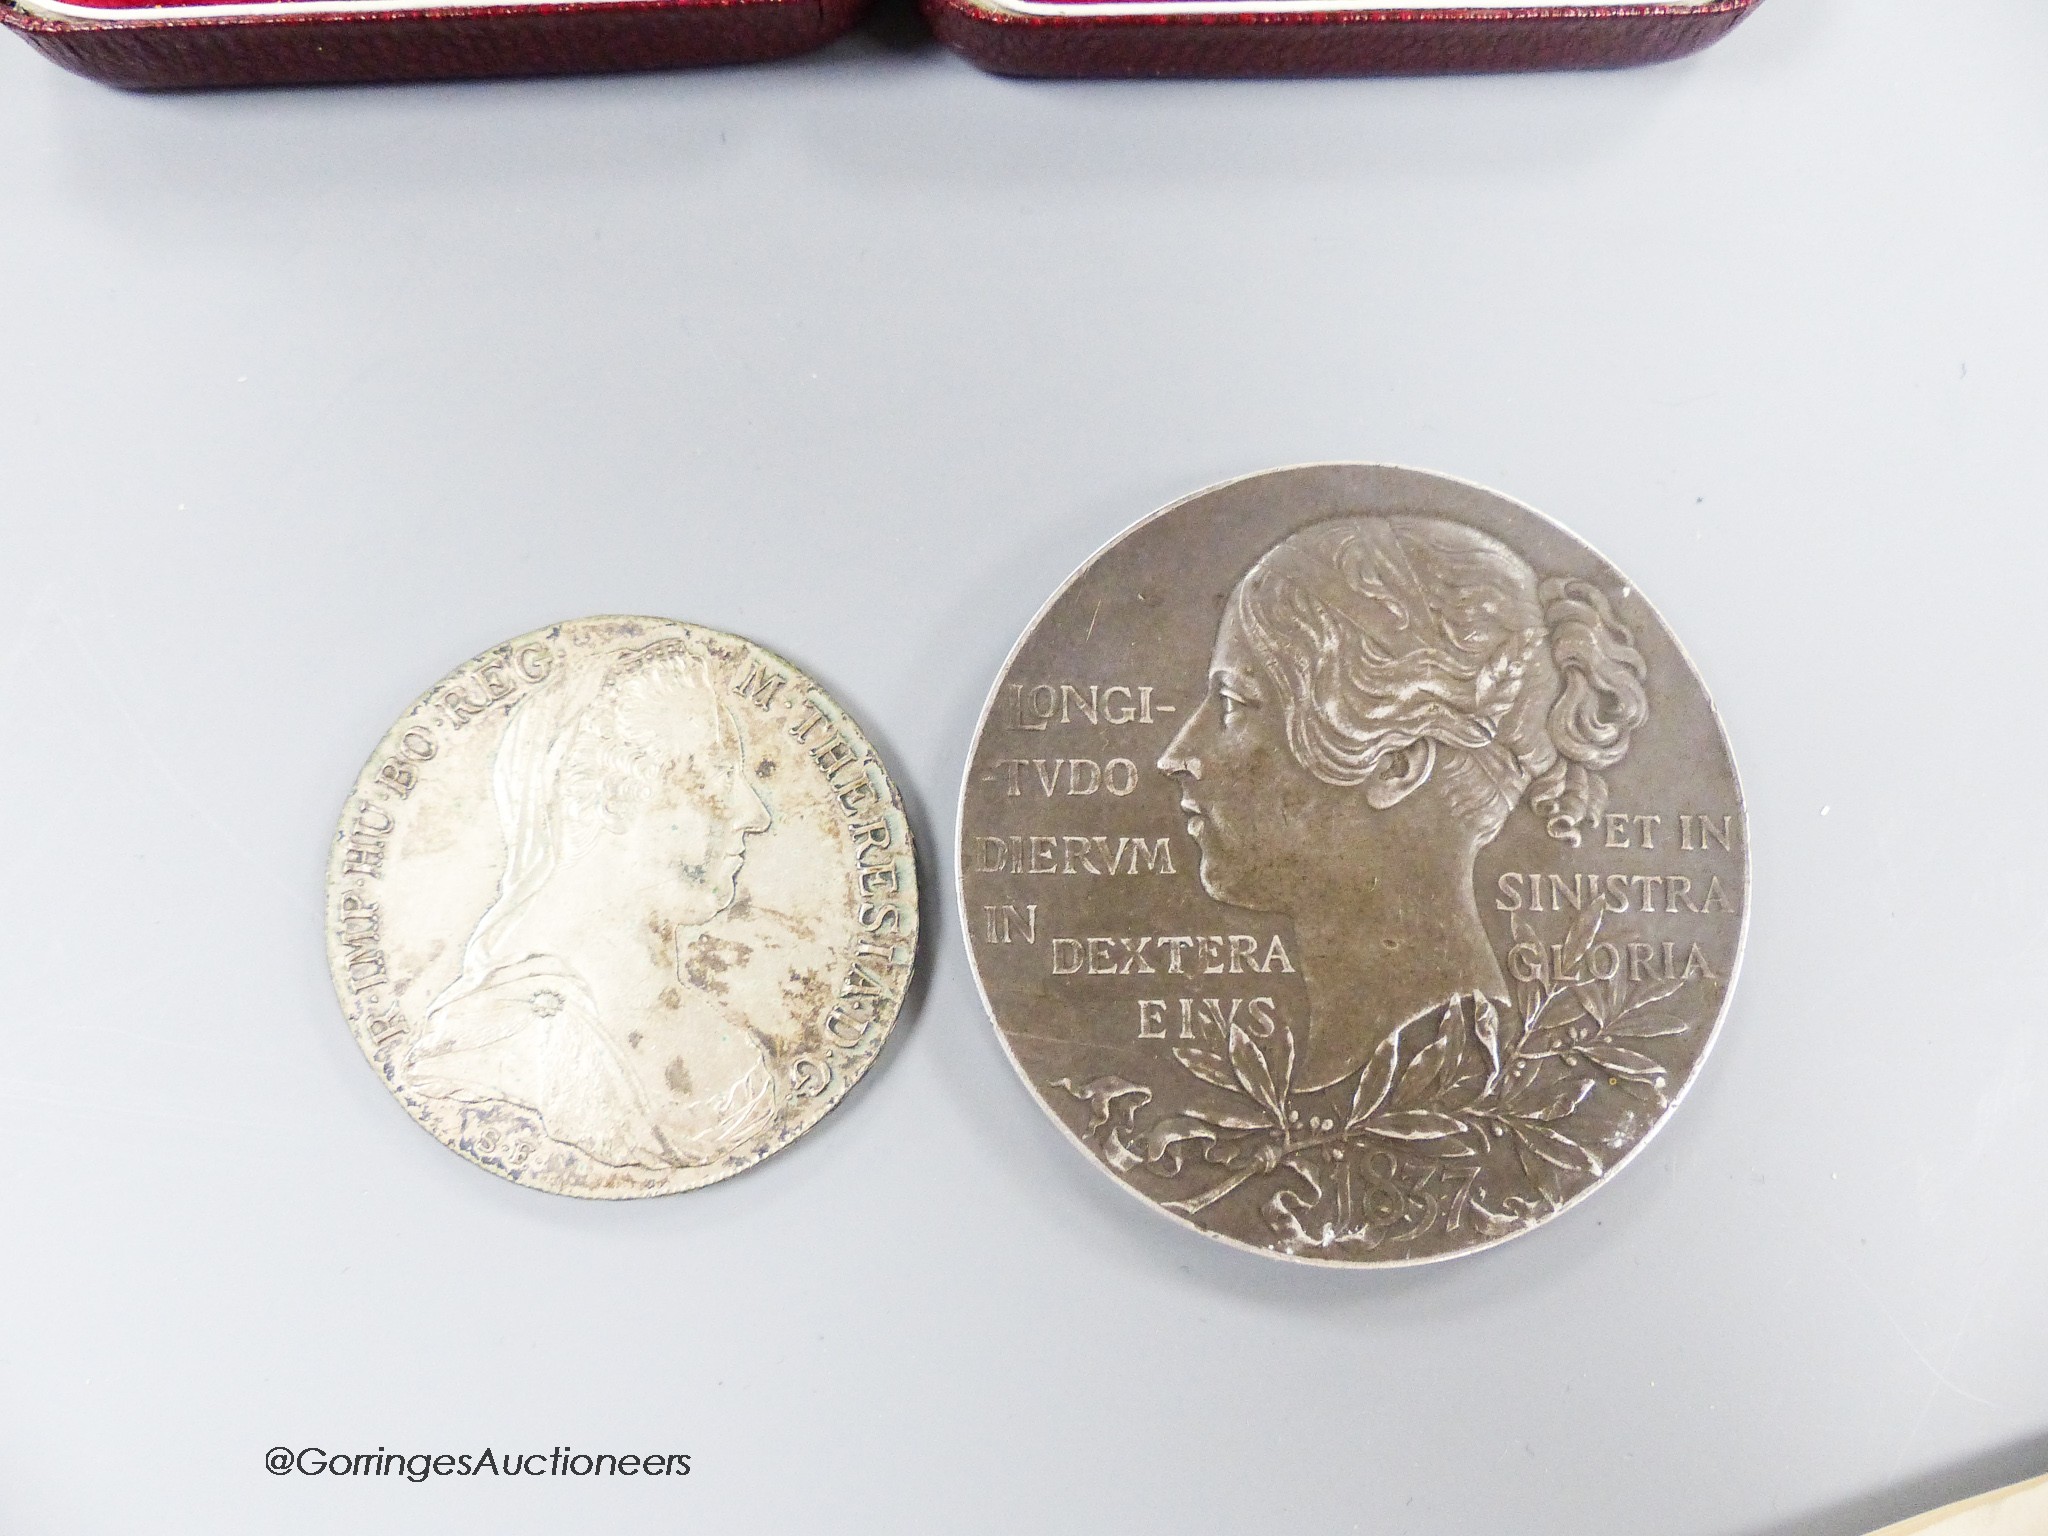 Two Churchill crowns and two silver medals